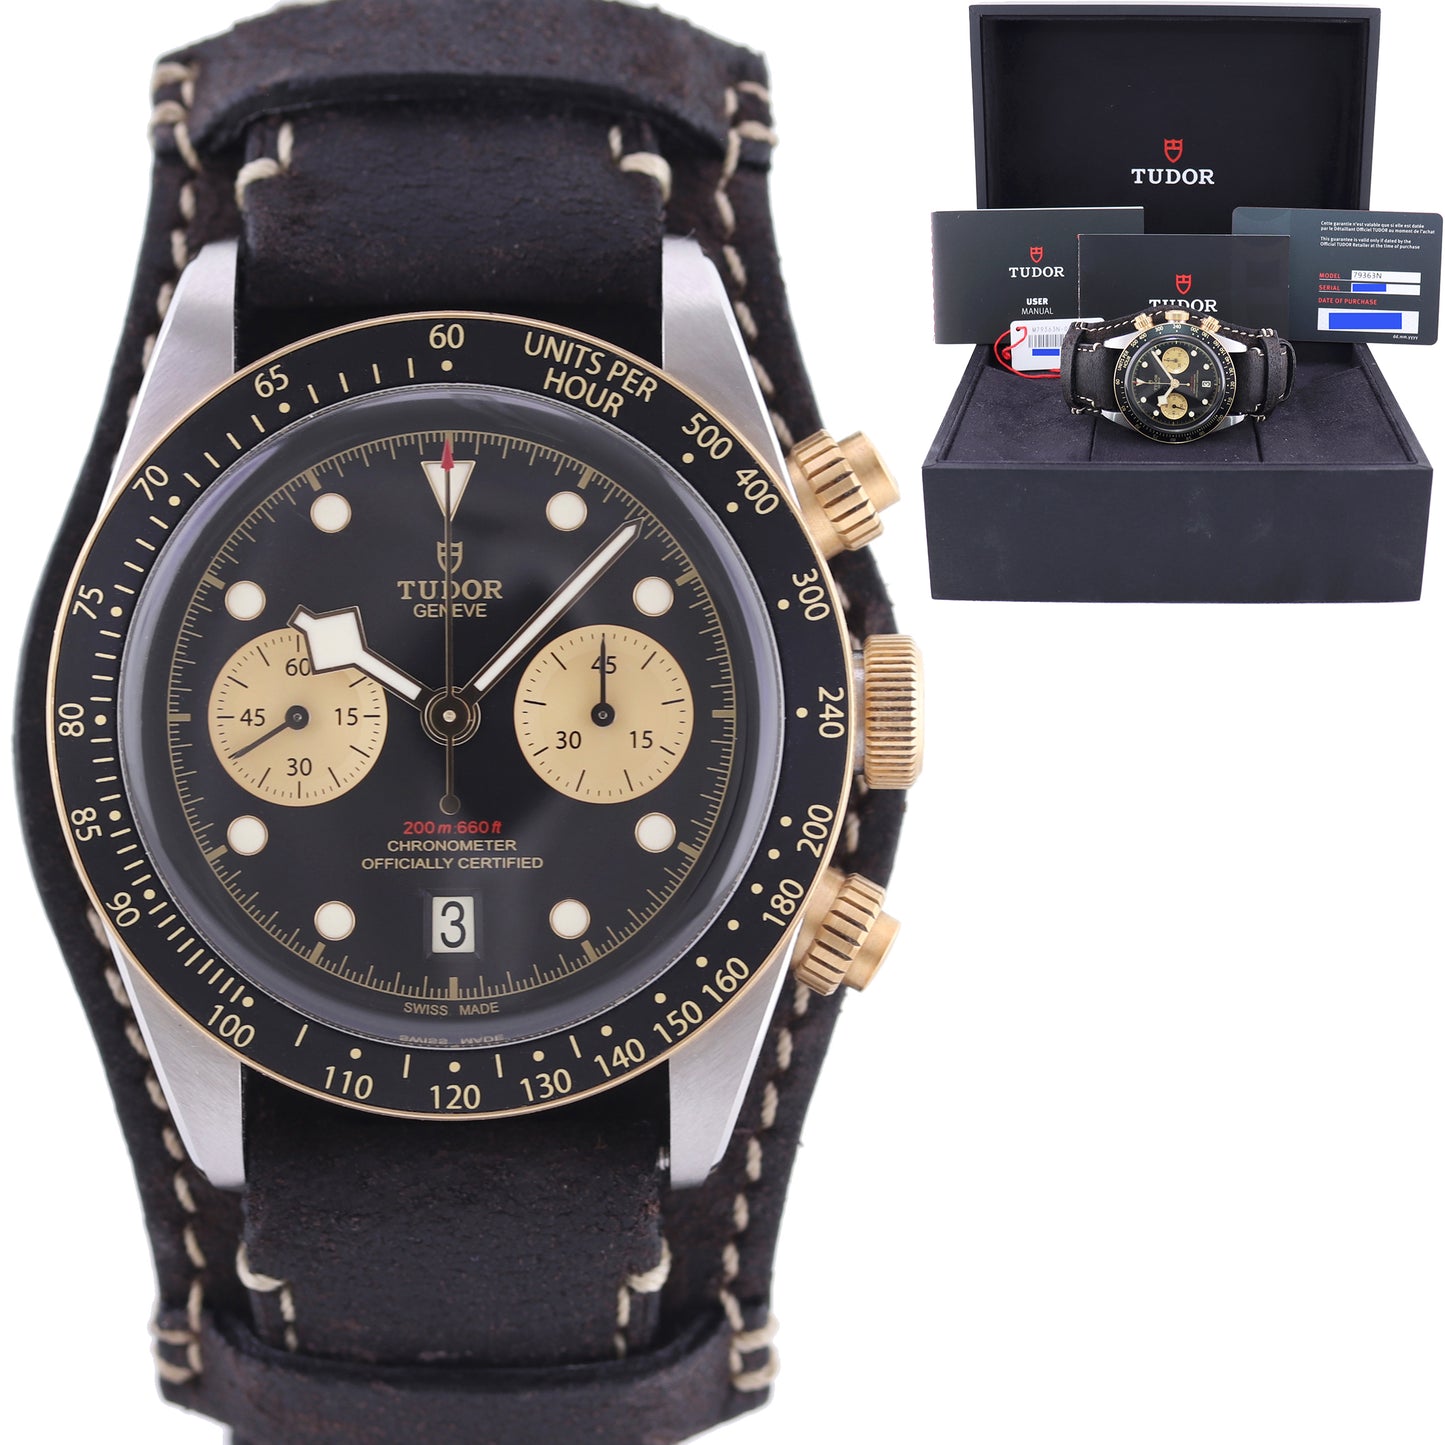 2022 PAPERS Tudor Black Bay Chronograph 79363N Two Tone Black 41mm Date Watch